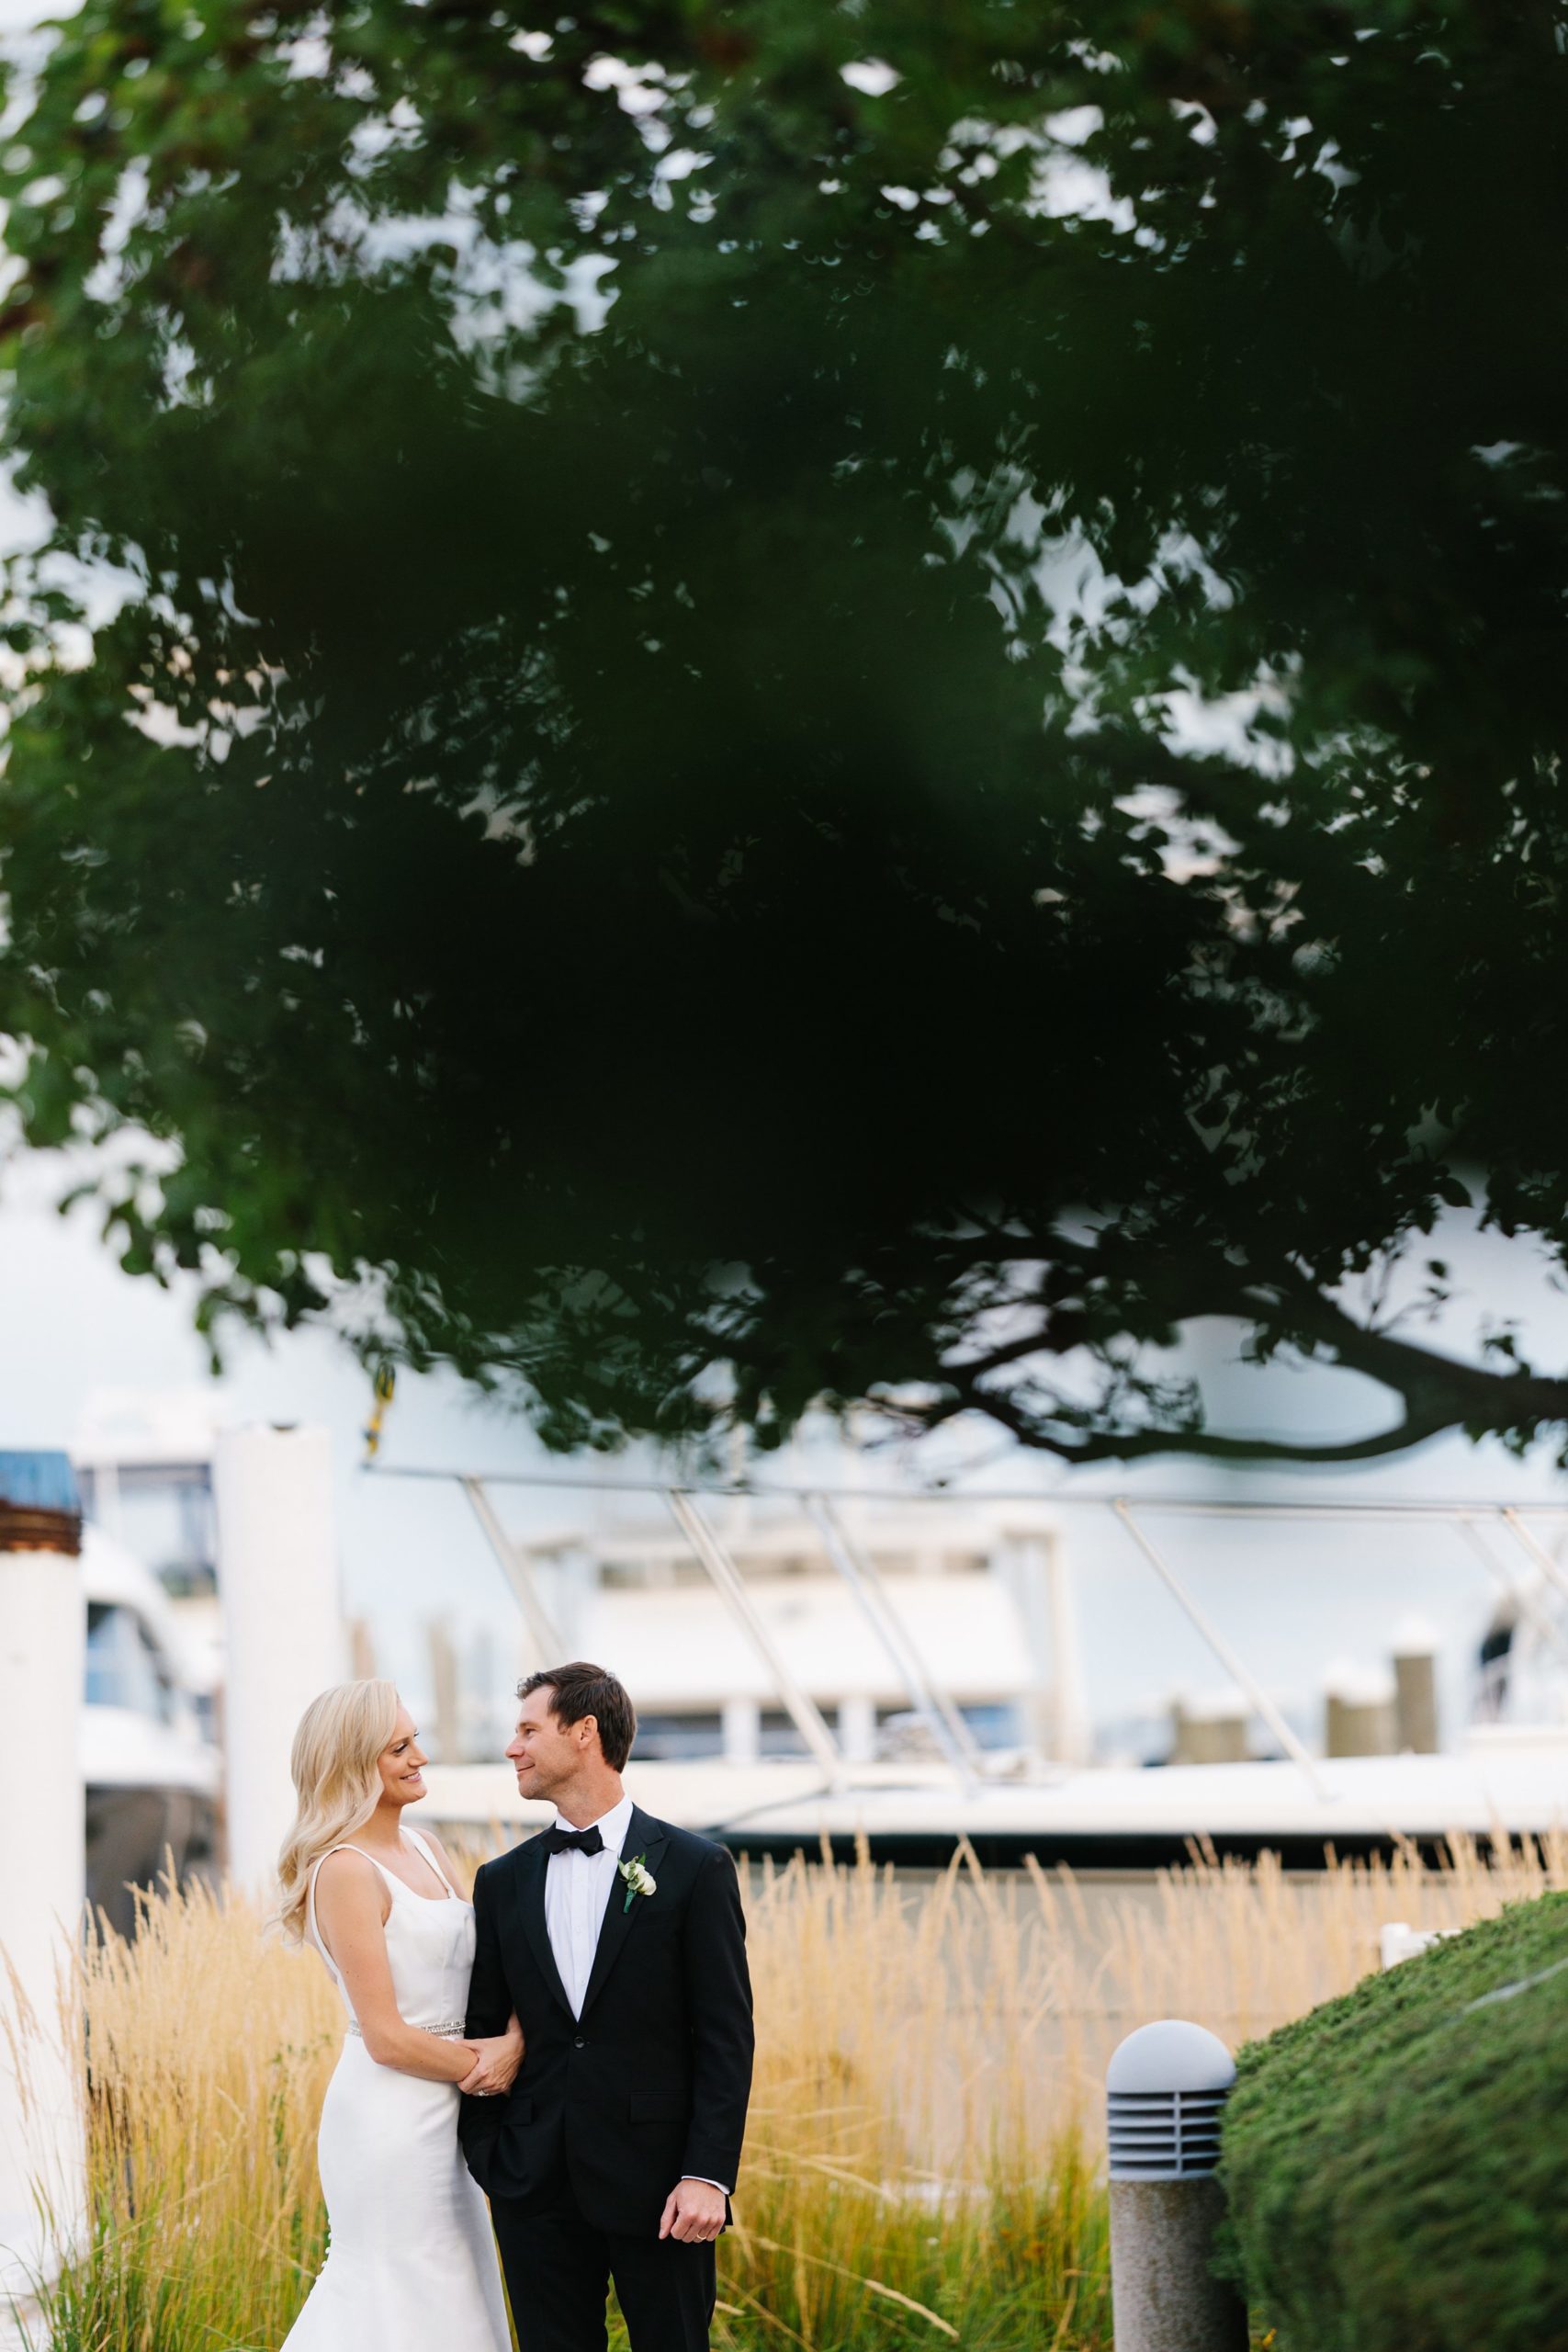 Faraway shot of the bride holding the grooms arm under a tree at the Grosse Pointe Yacht Club by Detroit Wedding Photographer Michele Maloney